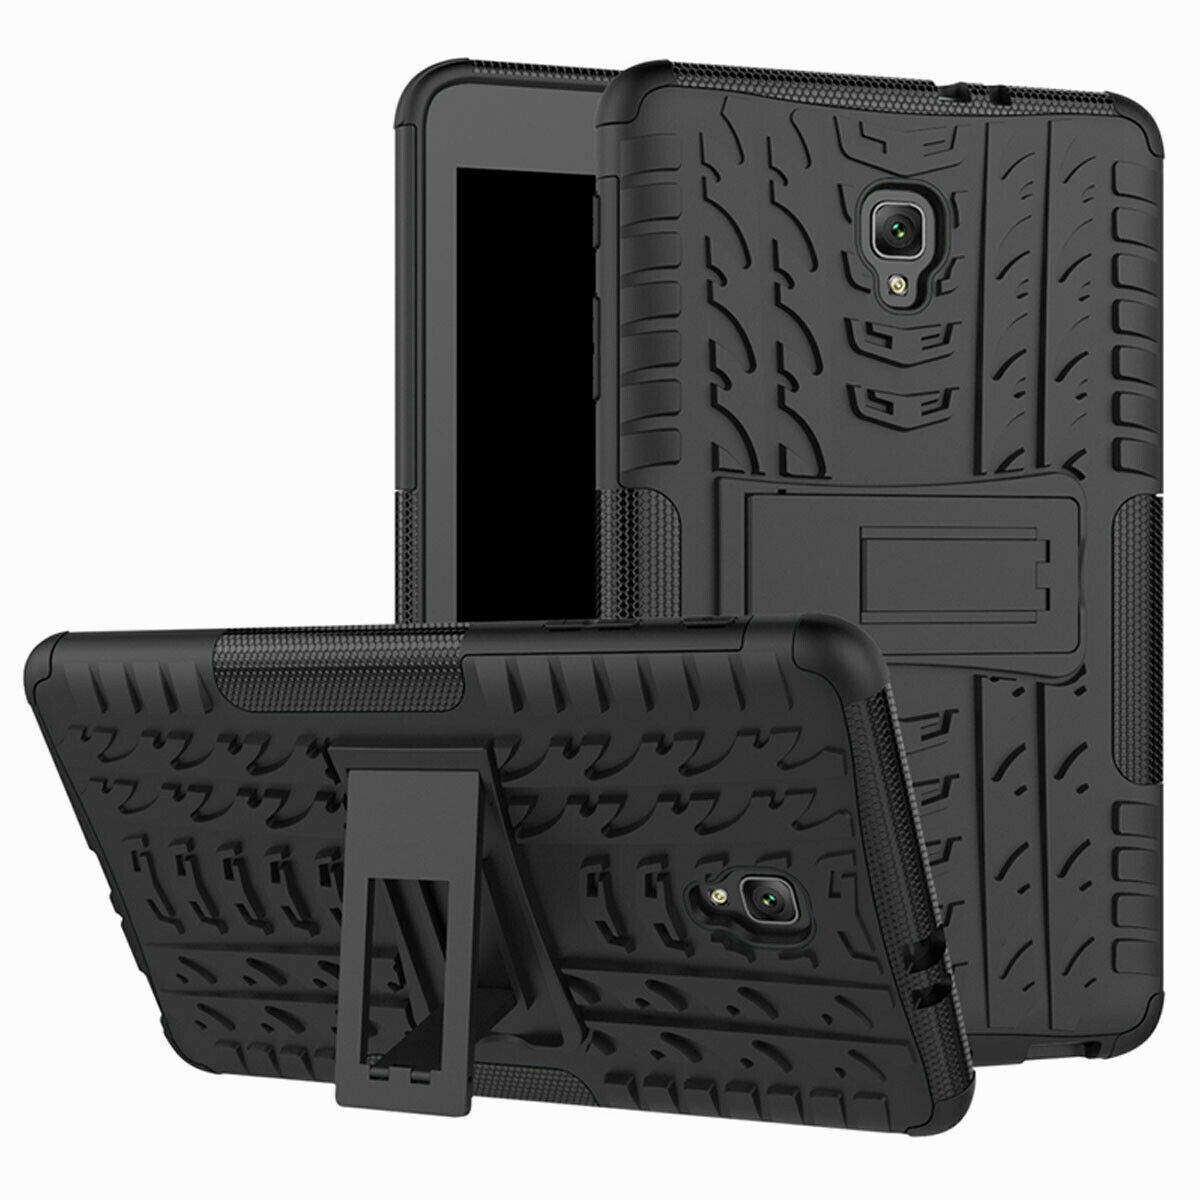 Rugged Hard Armor Case For Samsung Tab A 8.0 SM-T290 T387 T380 T350 Tablet Cover